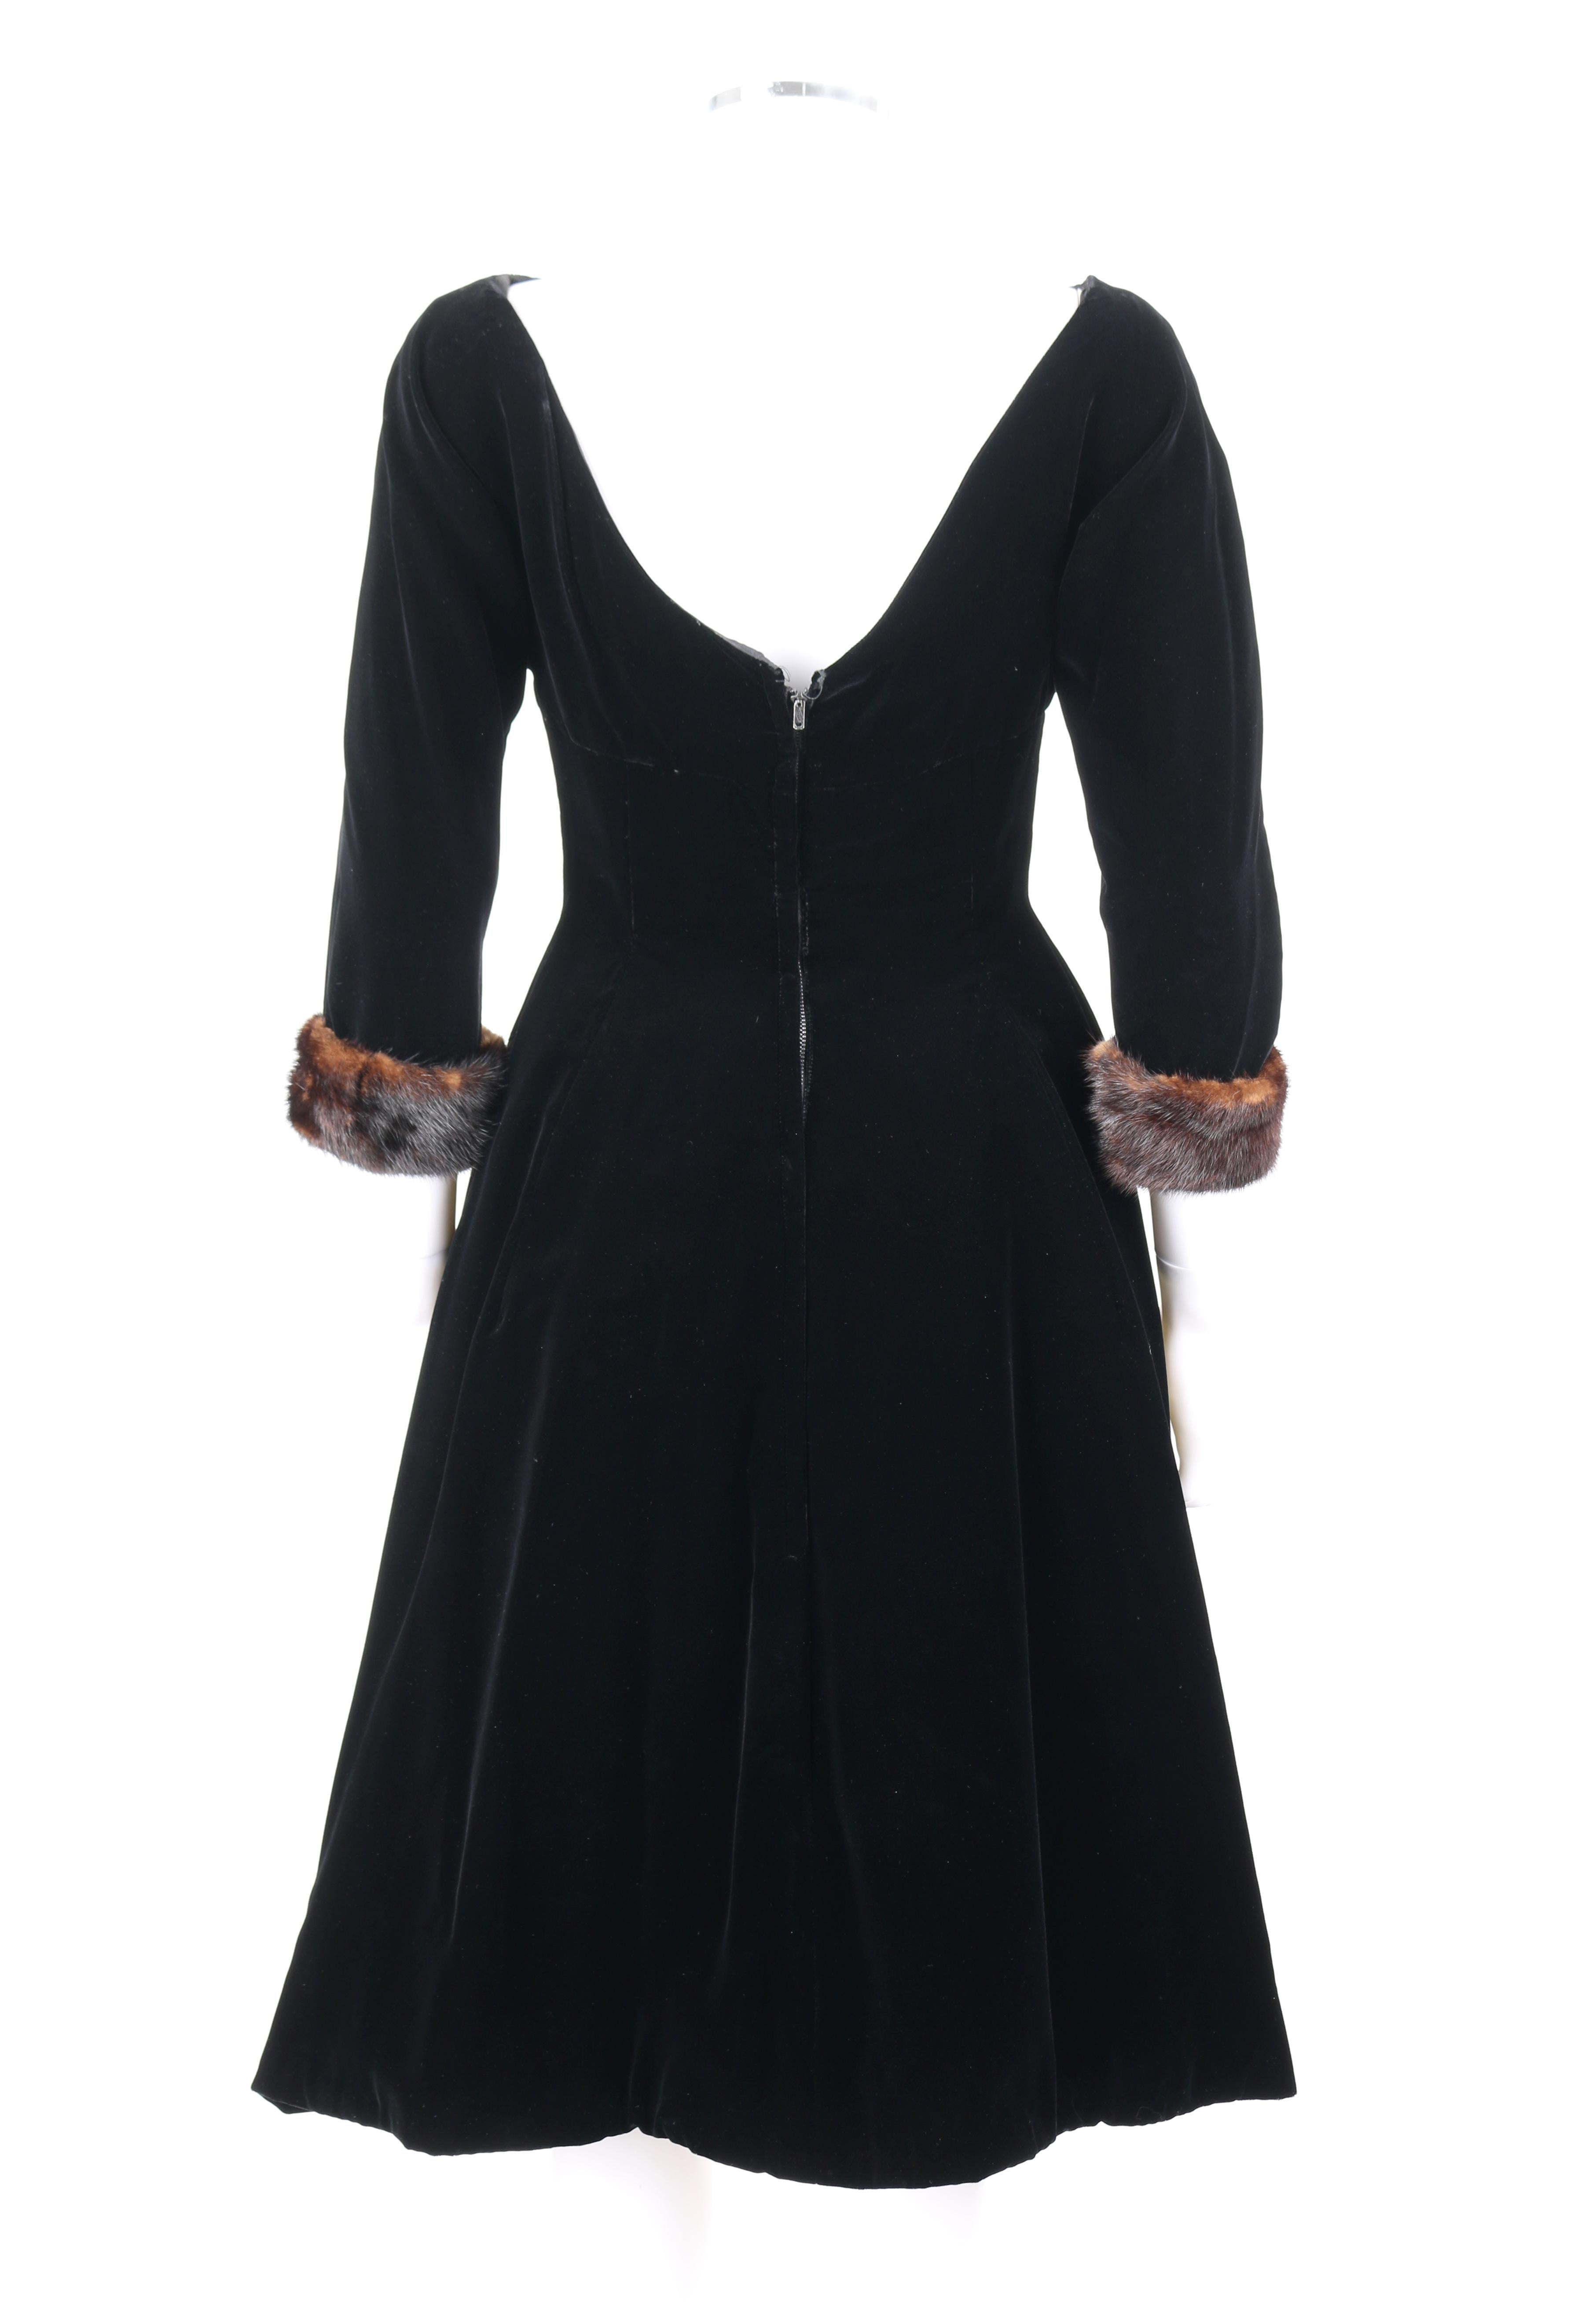 Young Modes CLAUDIA YOUNG c.1950's Black Velvet Mink Fur Cuff Cocktail Dress 1